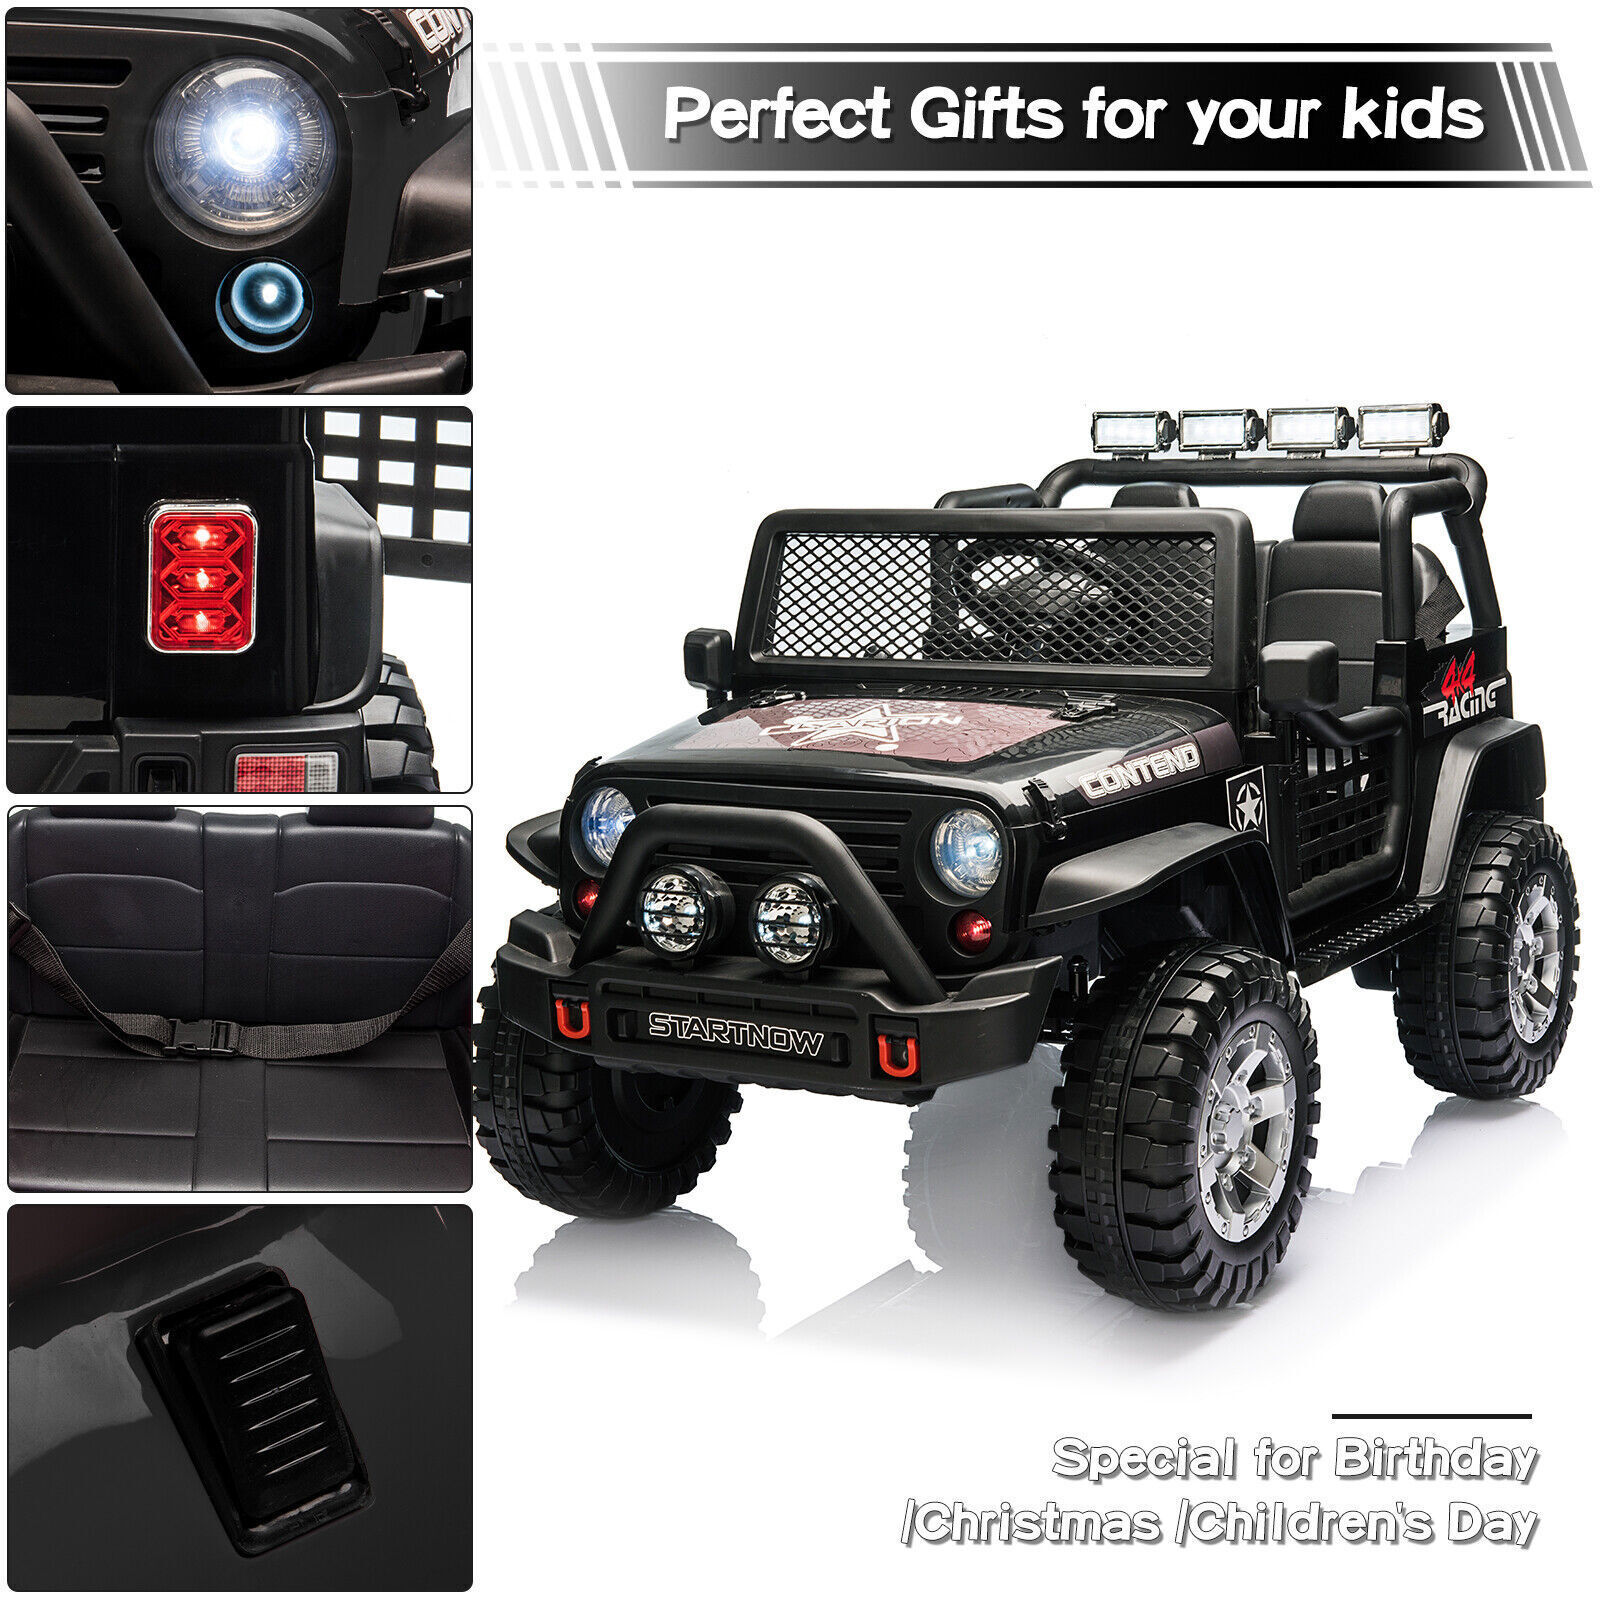 Dazone 12V Kids Ride on Jeep Car, Electric 2 Seats Off-road Jeep Ride on Truck Vehicle with Remote Control, LED Lights, MP3 Music, Black - image 3 of 8